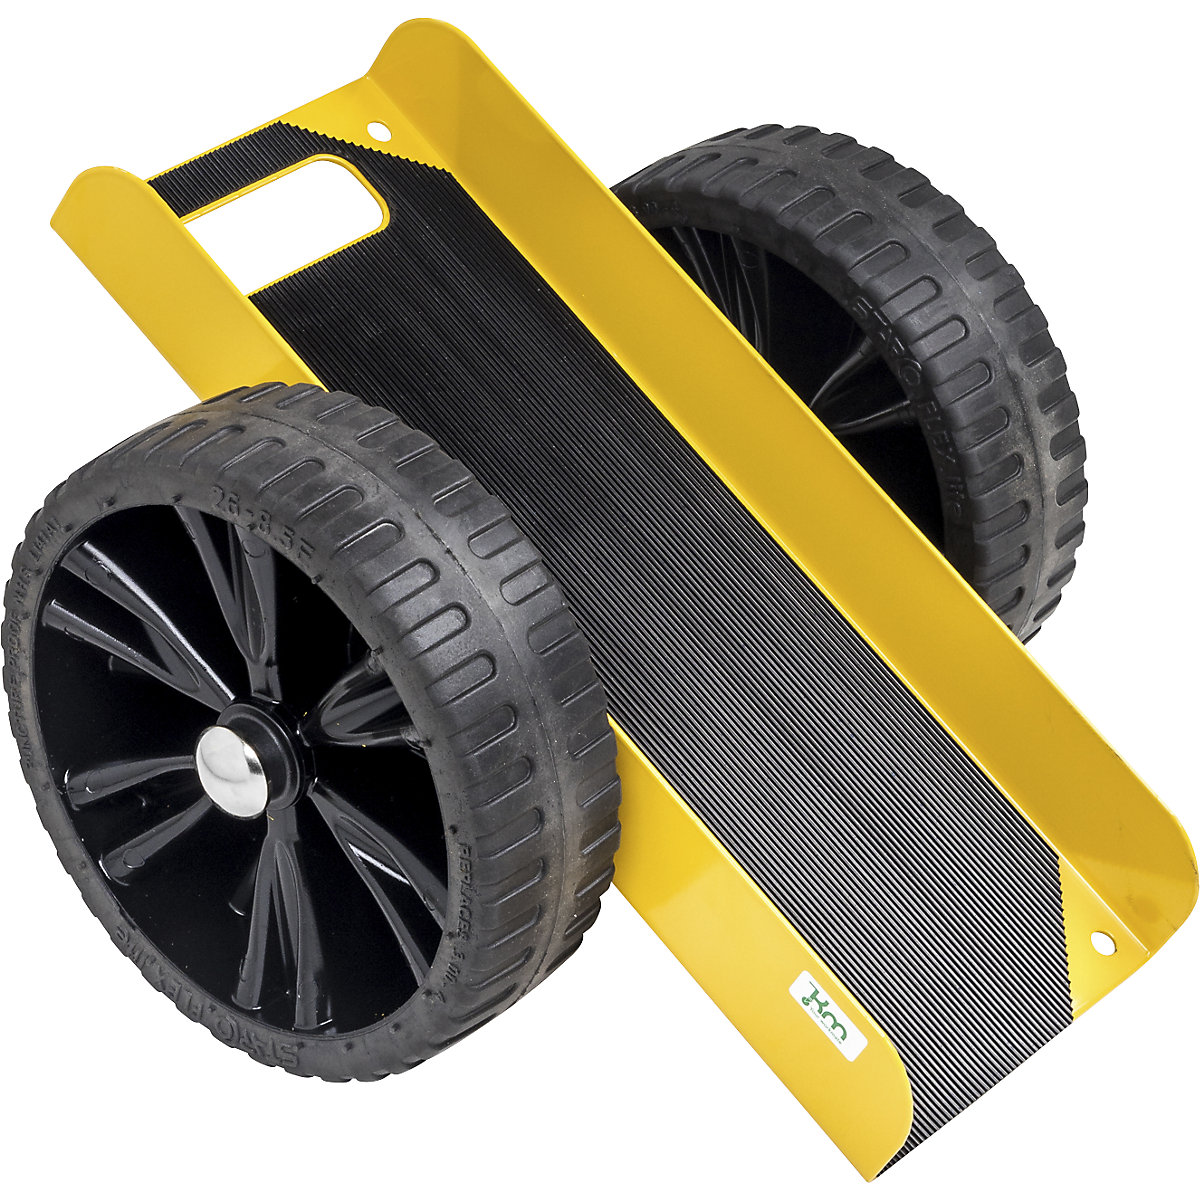 KM142650 panel dolly – Kongamek, LxWxH 490 x 380 x 260 mm, puncture proof tyres, 5+ items-1